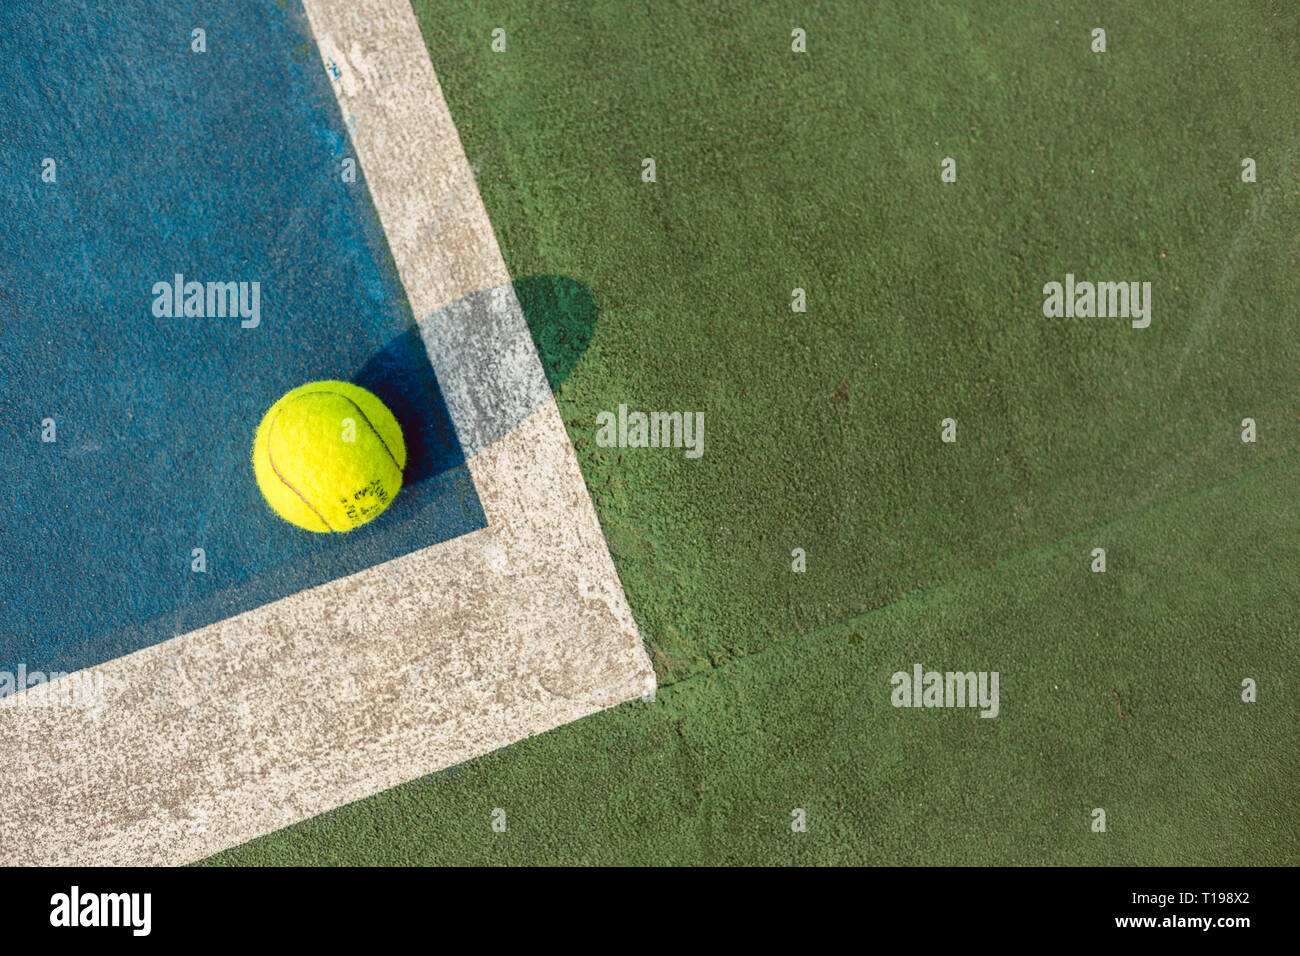 Fluorescent yellow tennis ball in the corner on blue acrylic surface Stock Photo